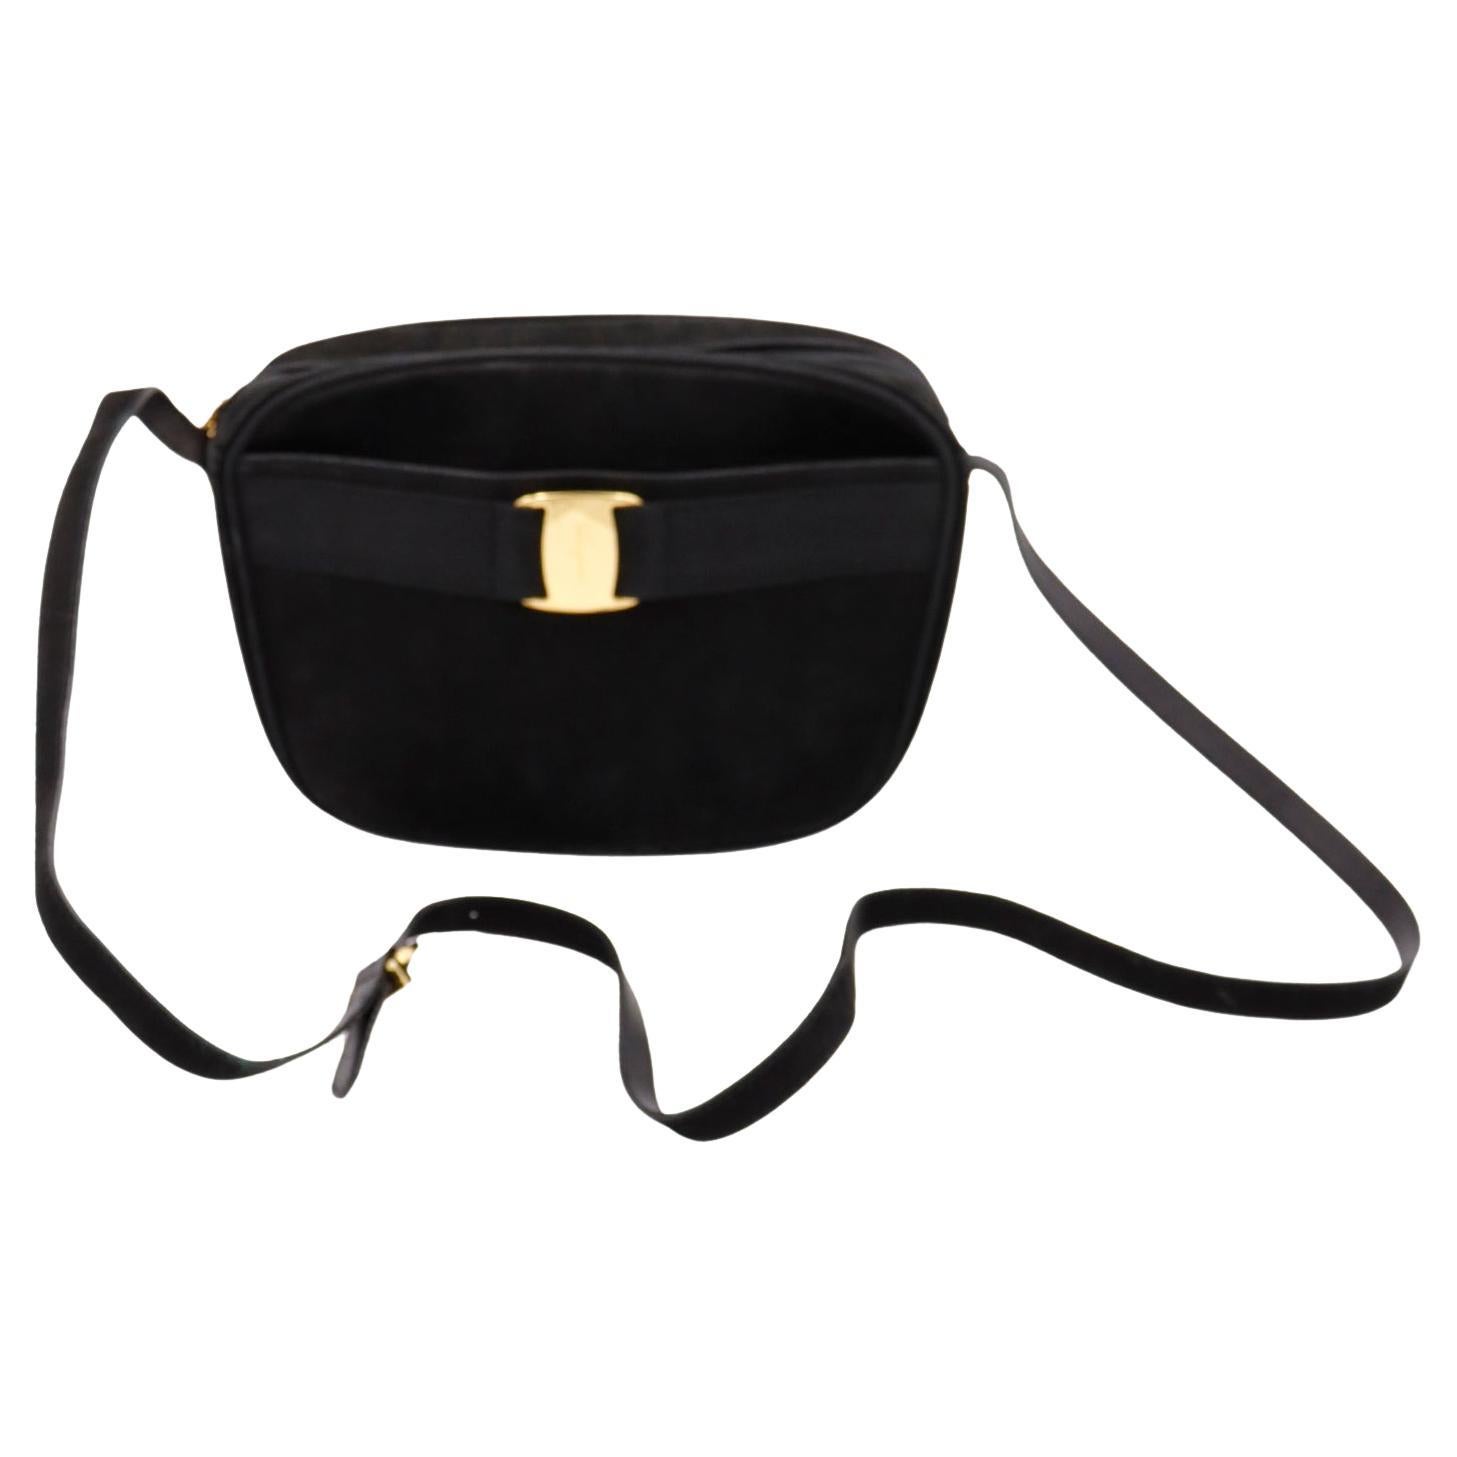 This timeless vintage Ferragamo suede shoulder bag is in a features engraved gold hardware that contrasts beautifully with the rich black suede. This bag has grosgrain ribbon detail on front that laces through the monogrammed Ferragamo gold buckle.